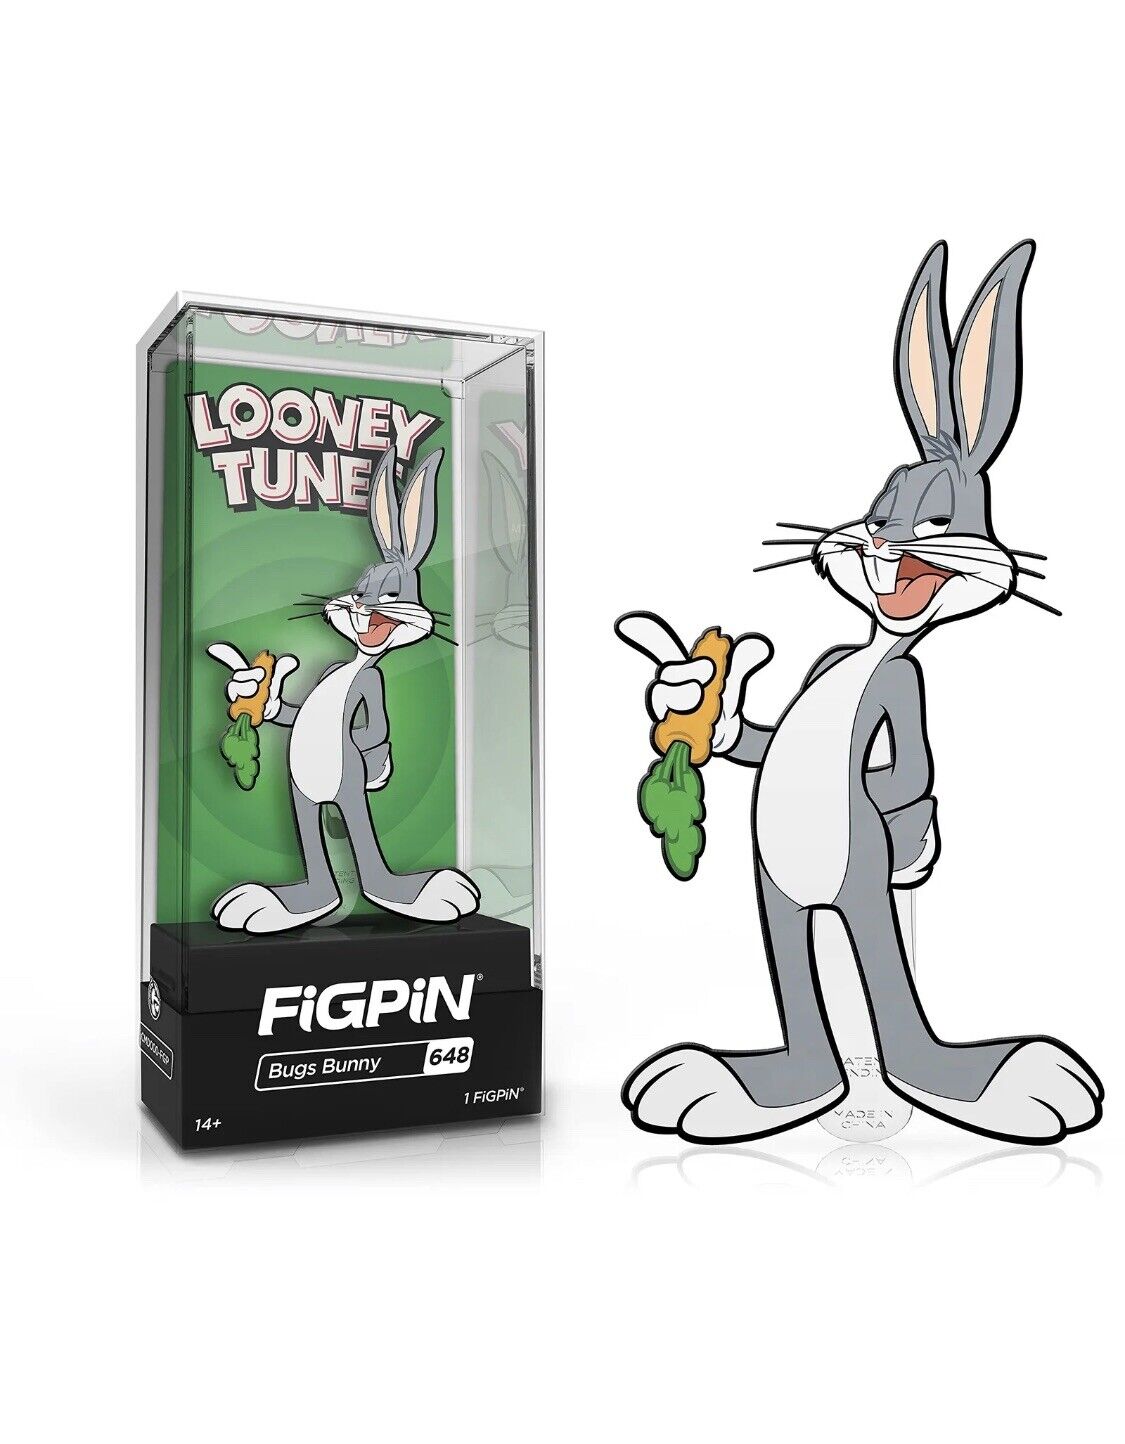 FiGPiN #648 Looney Tunes - BUGS BUNNY Hard Case Enamel Pin Collectible